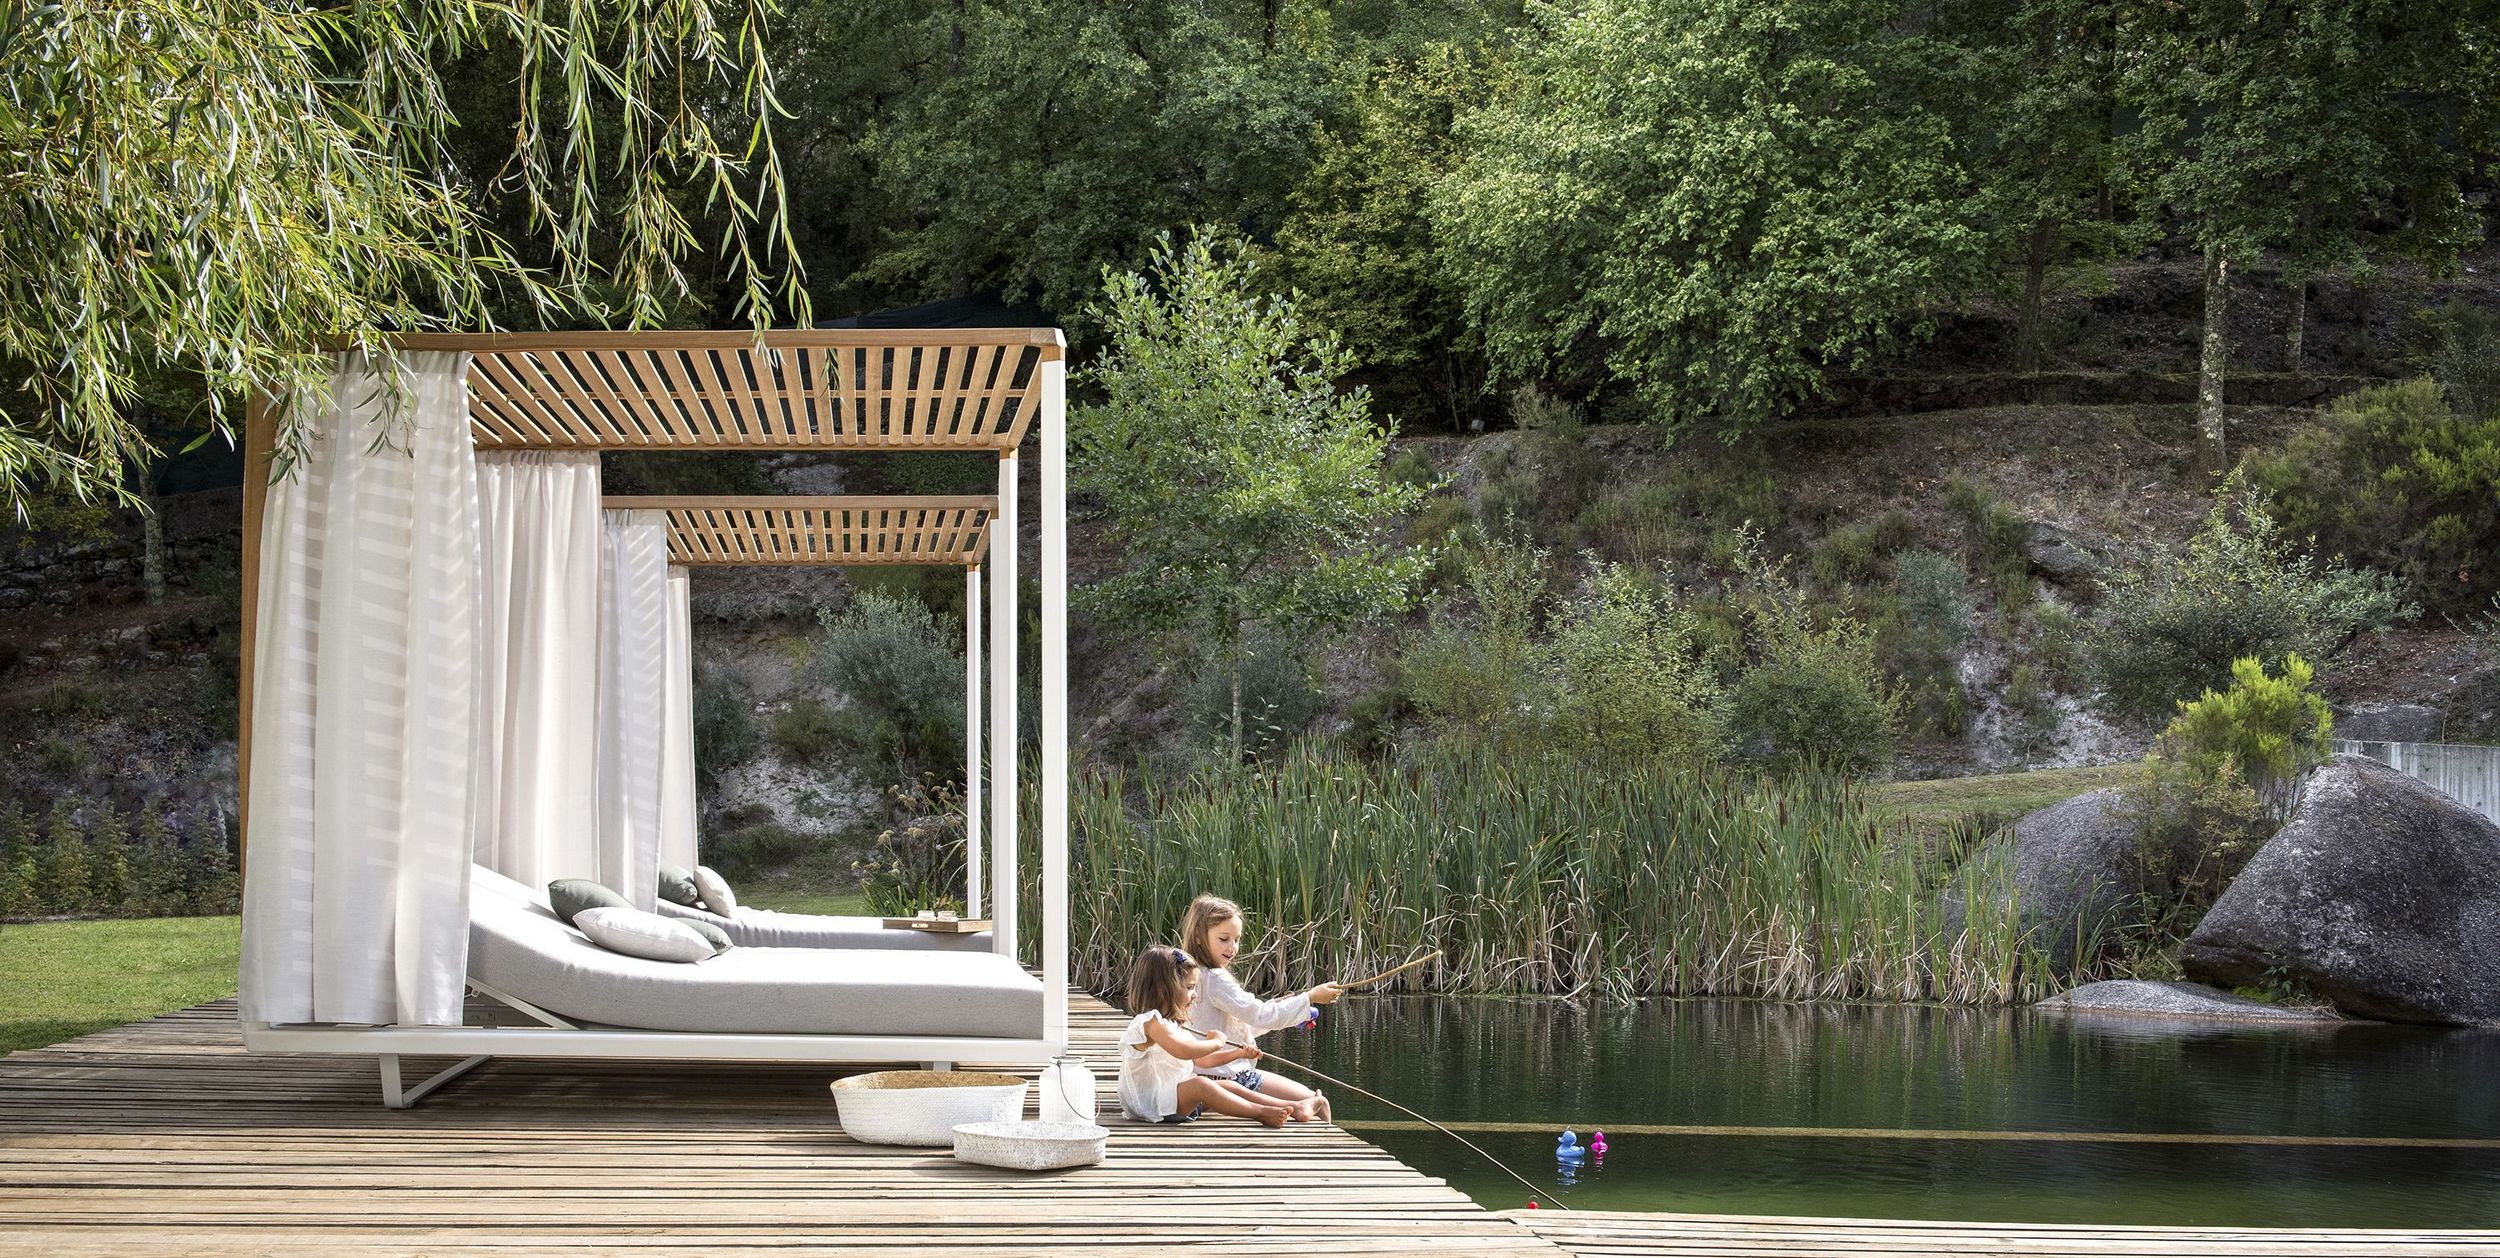 Pavilion daybed by Monica Armani for Tribù